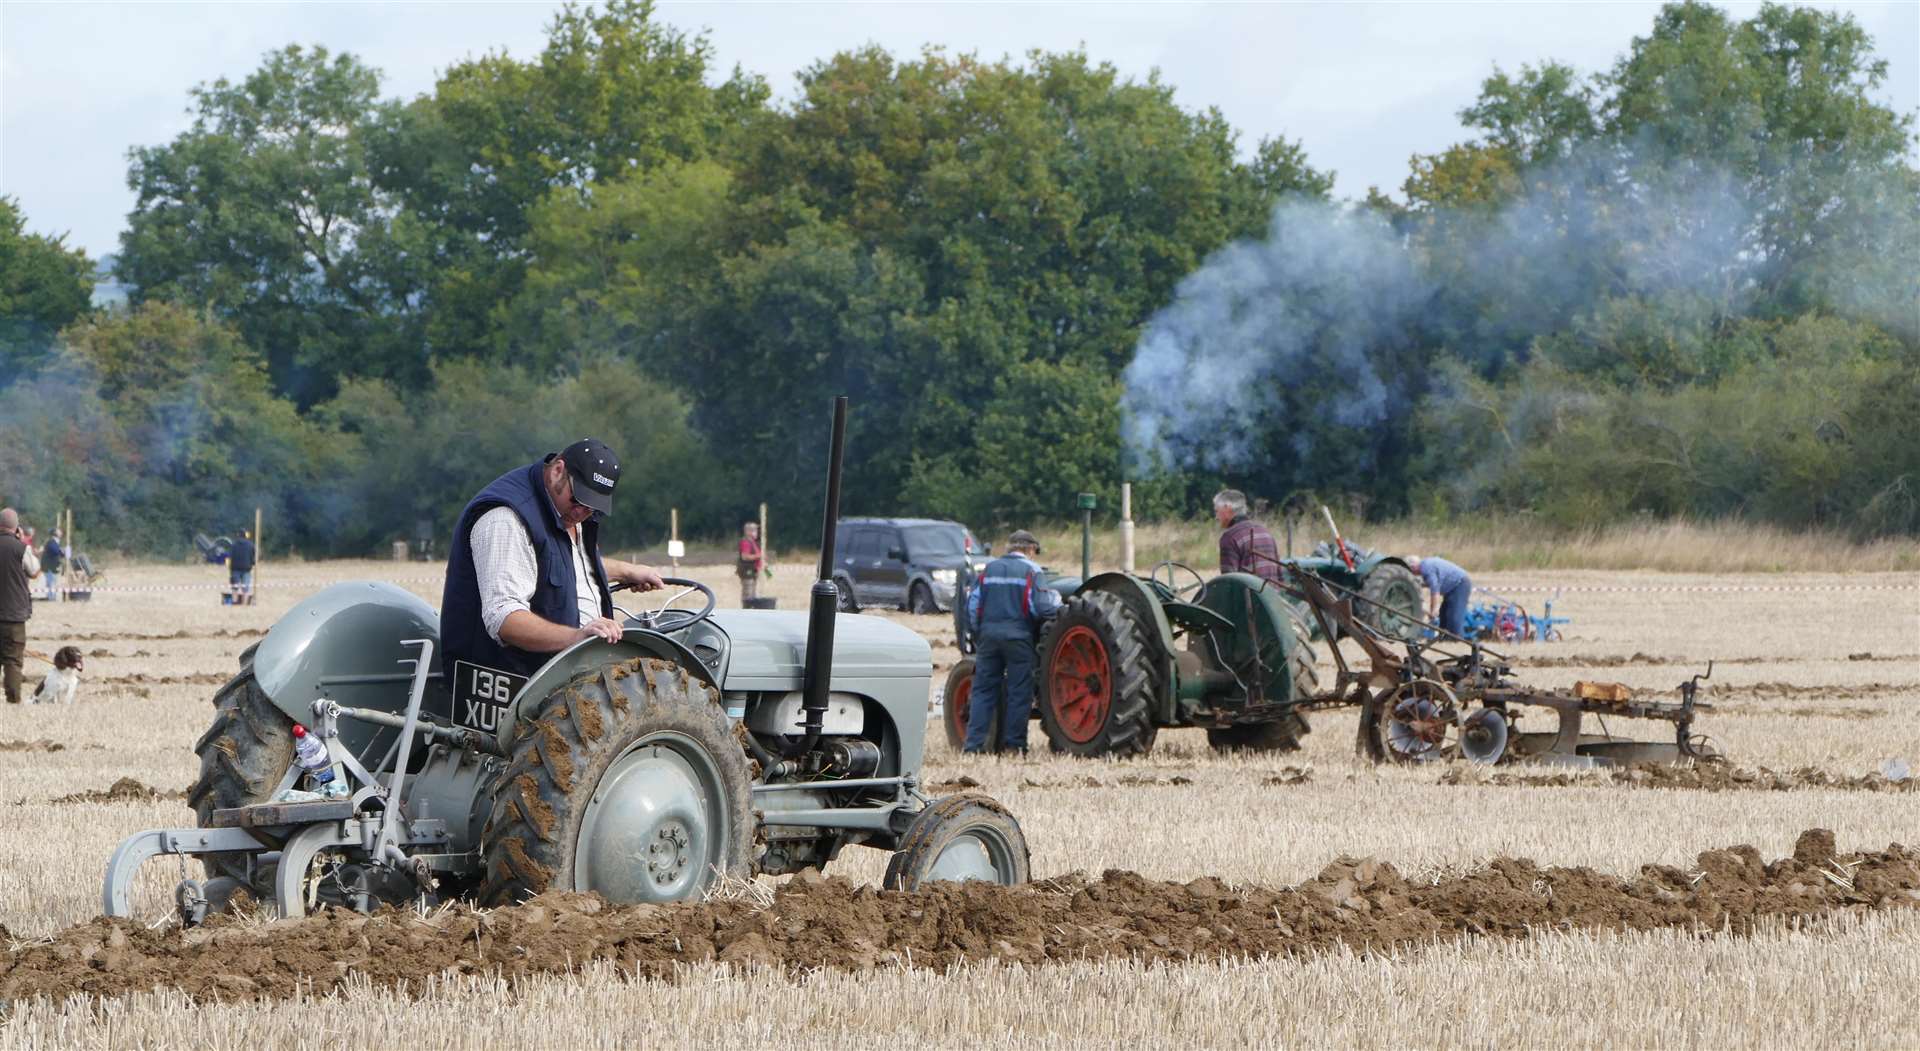 The Weald of Kent Plouging Match has been running for decades